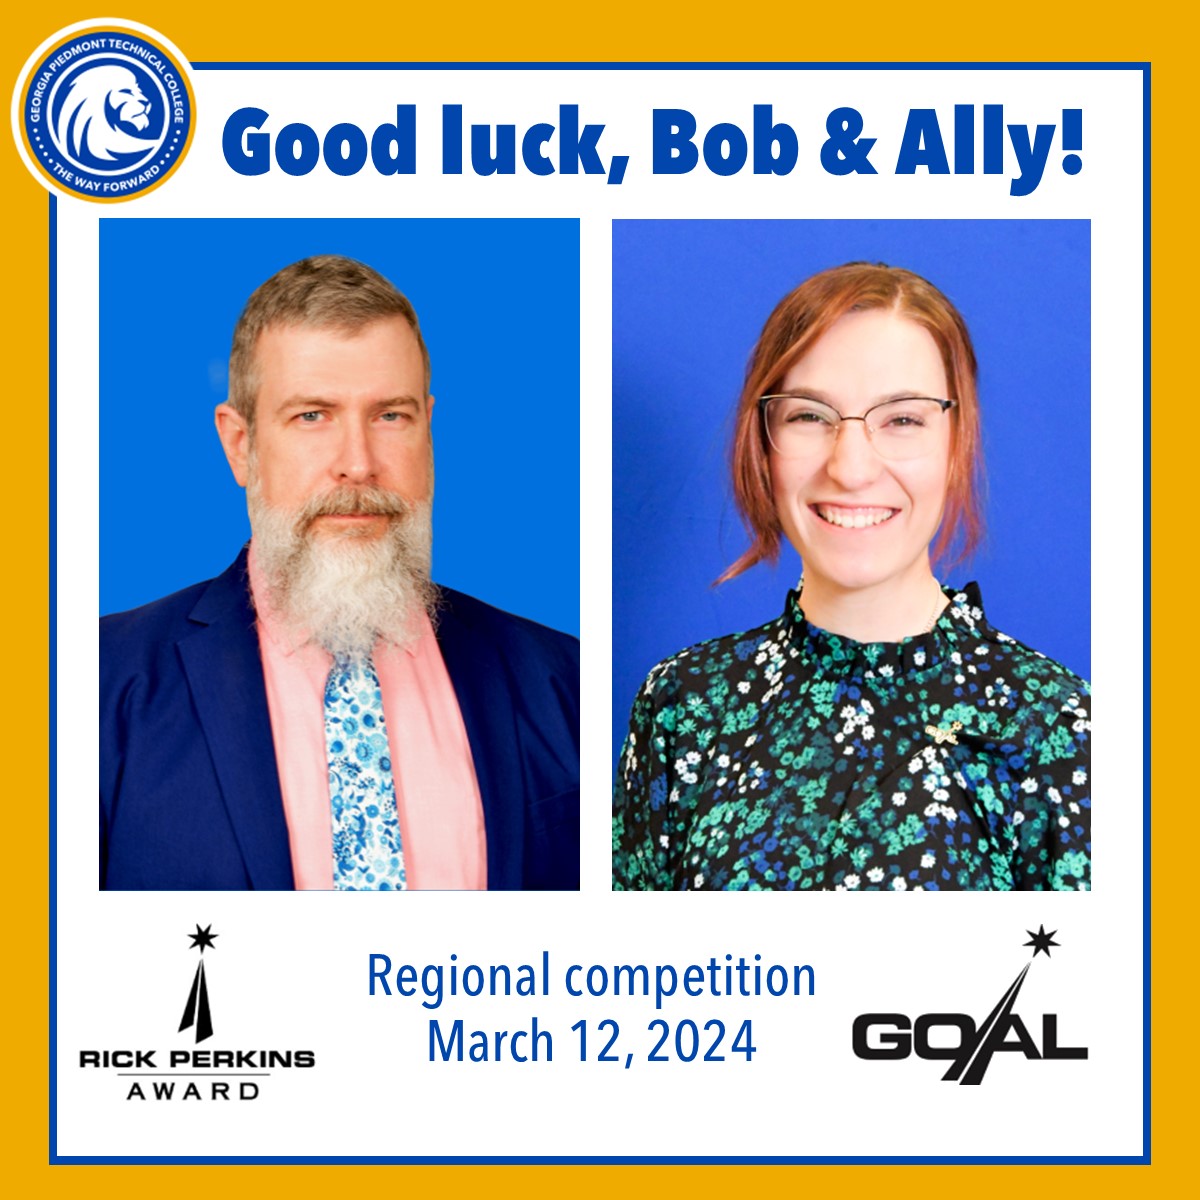 Wishing all the best to our GOAL (Georgia Occupational Award of Leadership) Student of the Year, Allison 'Ally' Hammer and our RPA (Rick Perkins Award) Instructor of the Year, Robert 'Bob' Reno. They're gearing up for their regional interviews as we speak! #GoGPTC #GPTCConnects